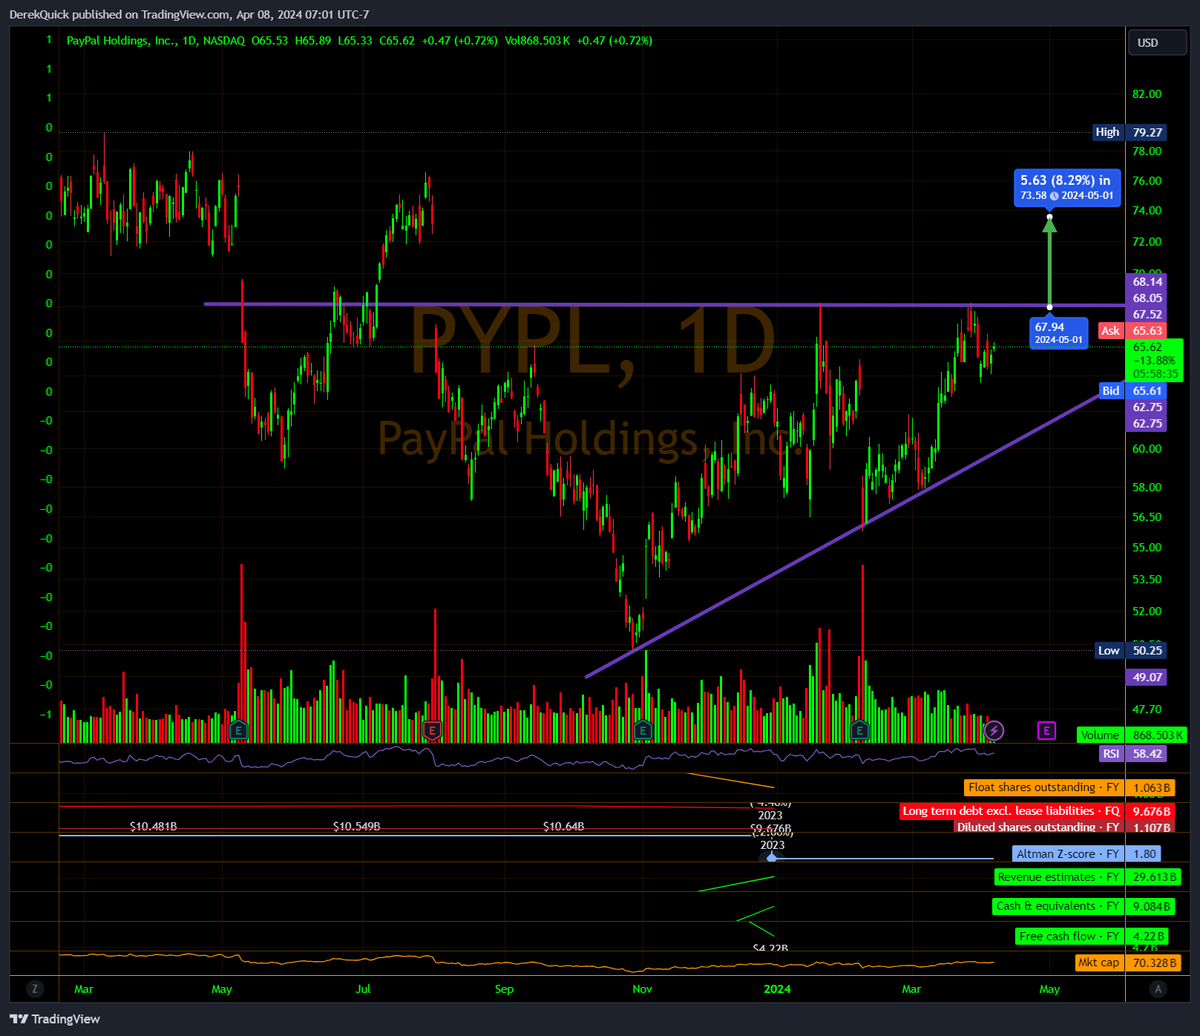 $PYPL 15 trading days until earnings , 6 trading days until blackout period. Still looking good, the Ascending triangle & Golden cross pattern going into earnings, bouncing around right where I thought it would. It might push up to test $68 again. Looking for big vol during ER.